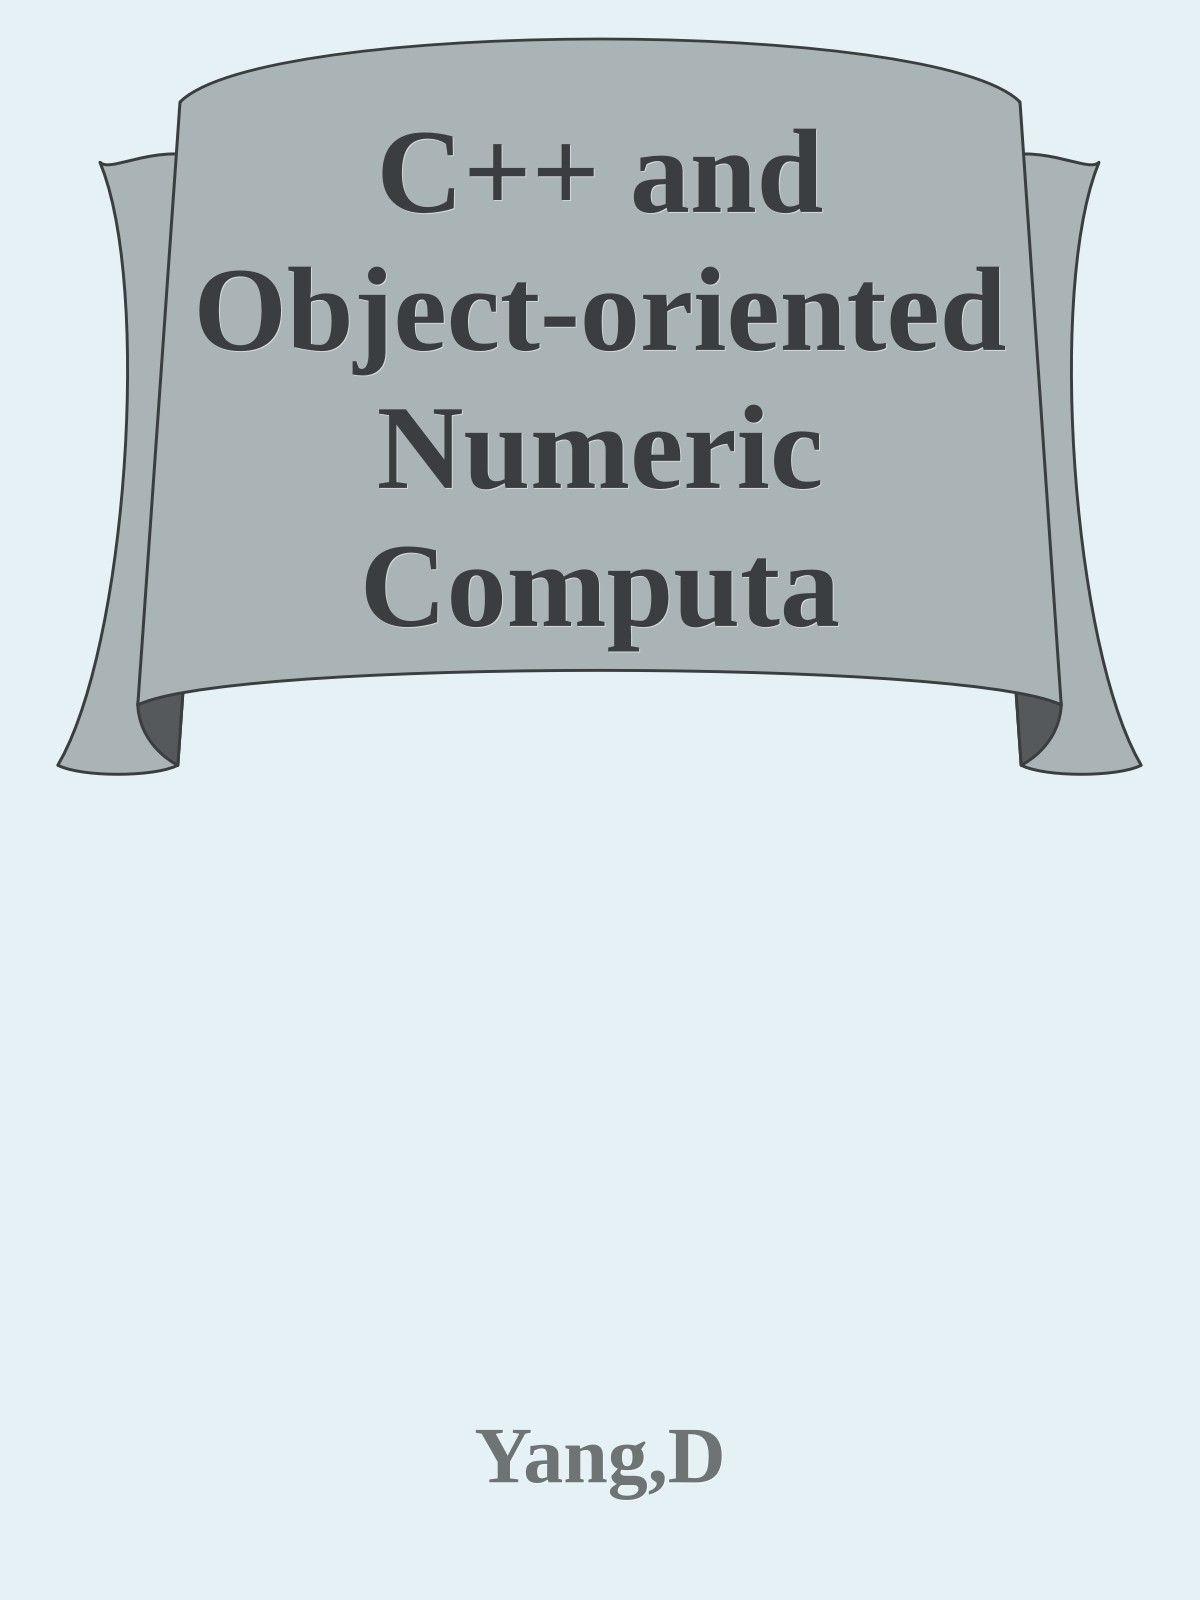 C++ and Object-oriented Numeric Computa